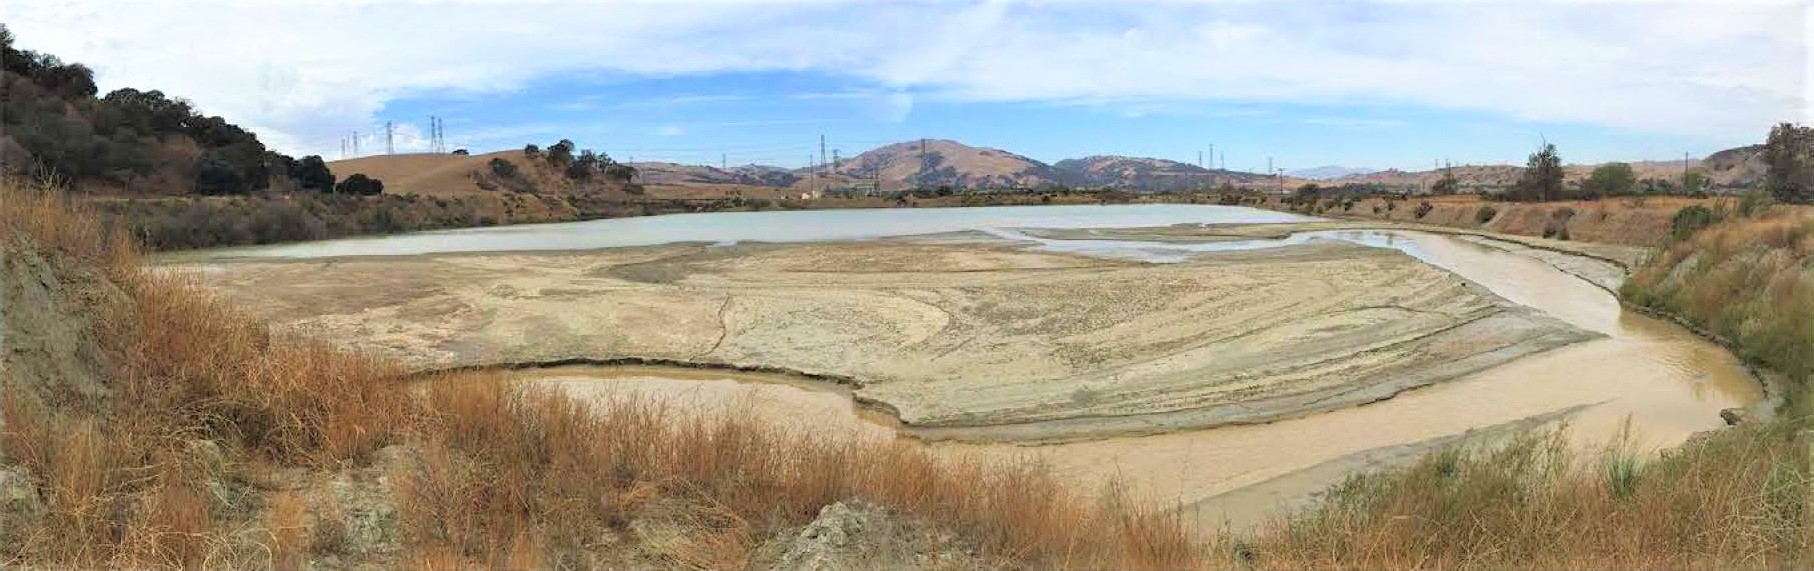 Mission Valley Sand and Gravel A Pond for Recovering Fine Materials Remaining after Rock Crushing